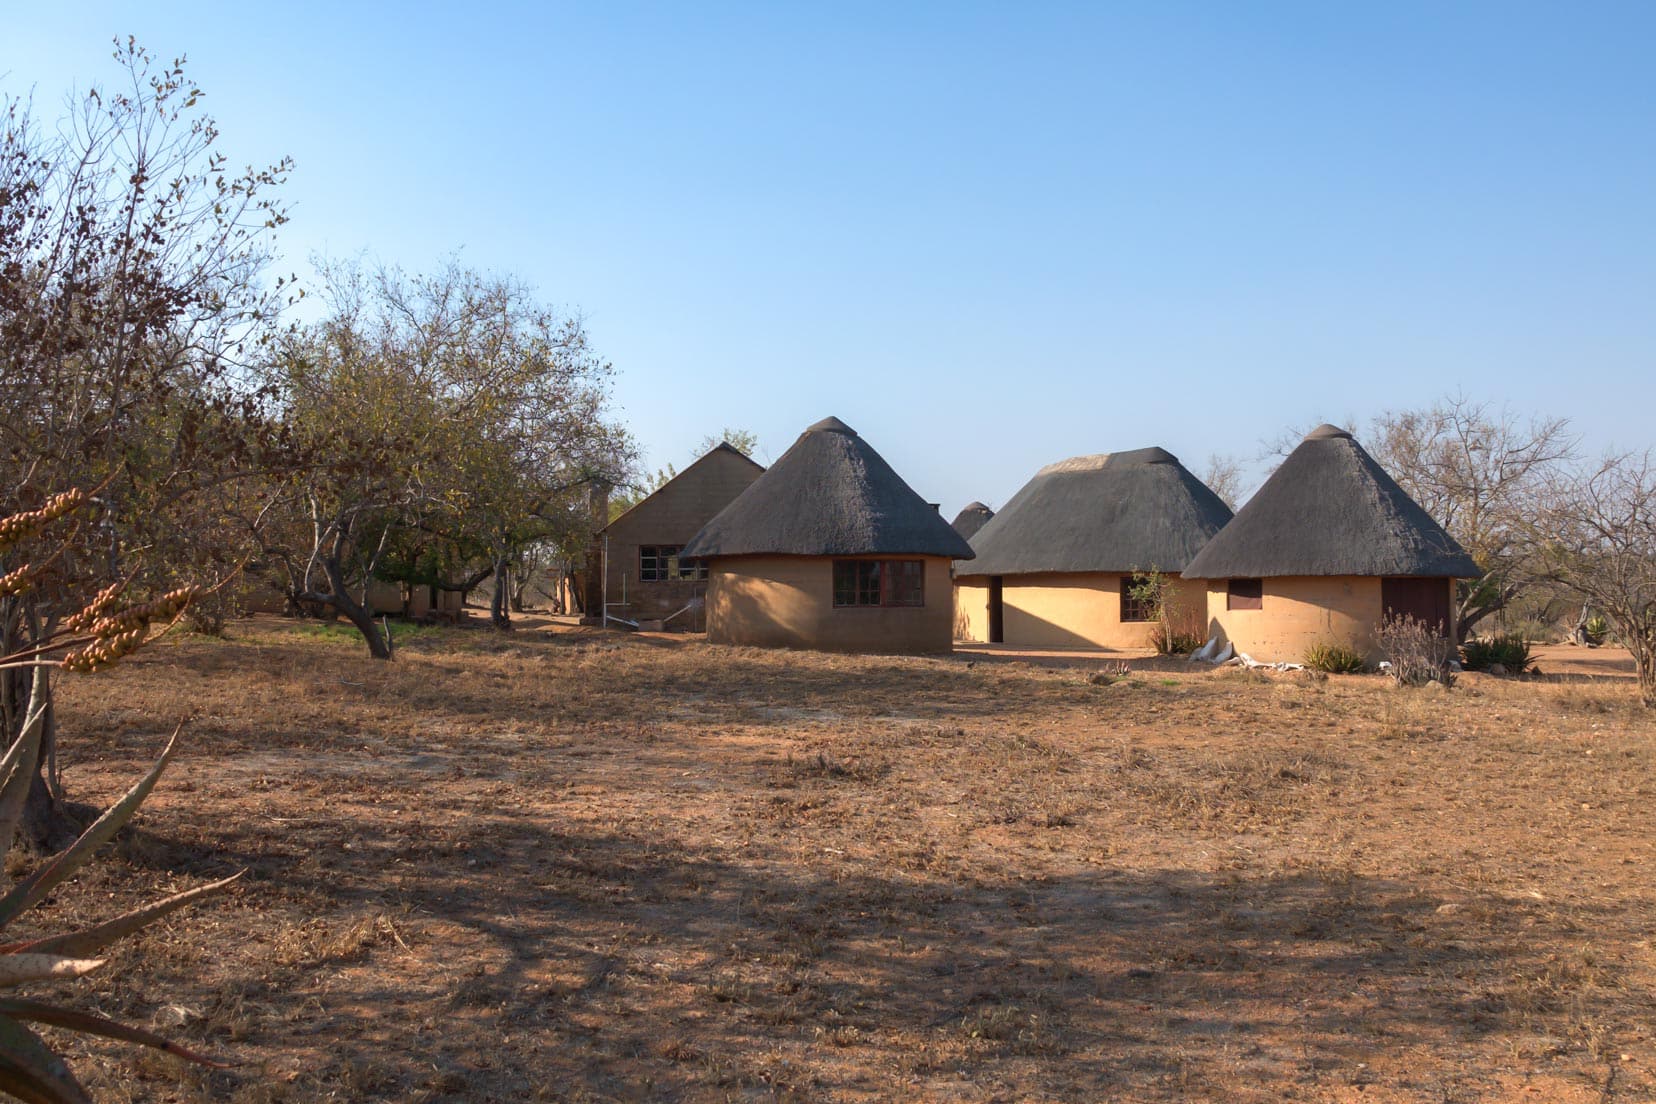 Our house sitting in the South African Bush - A few round huts with straw roofs